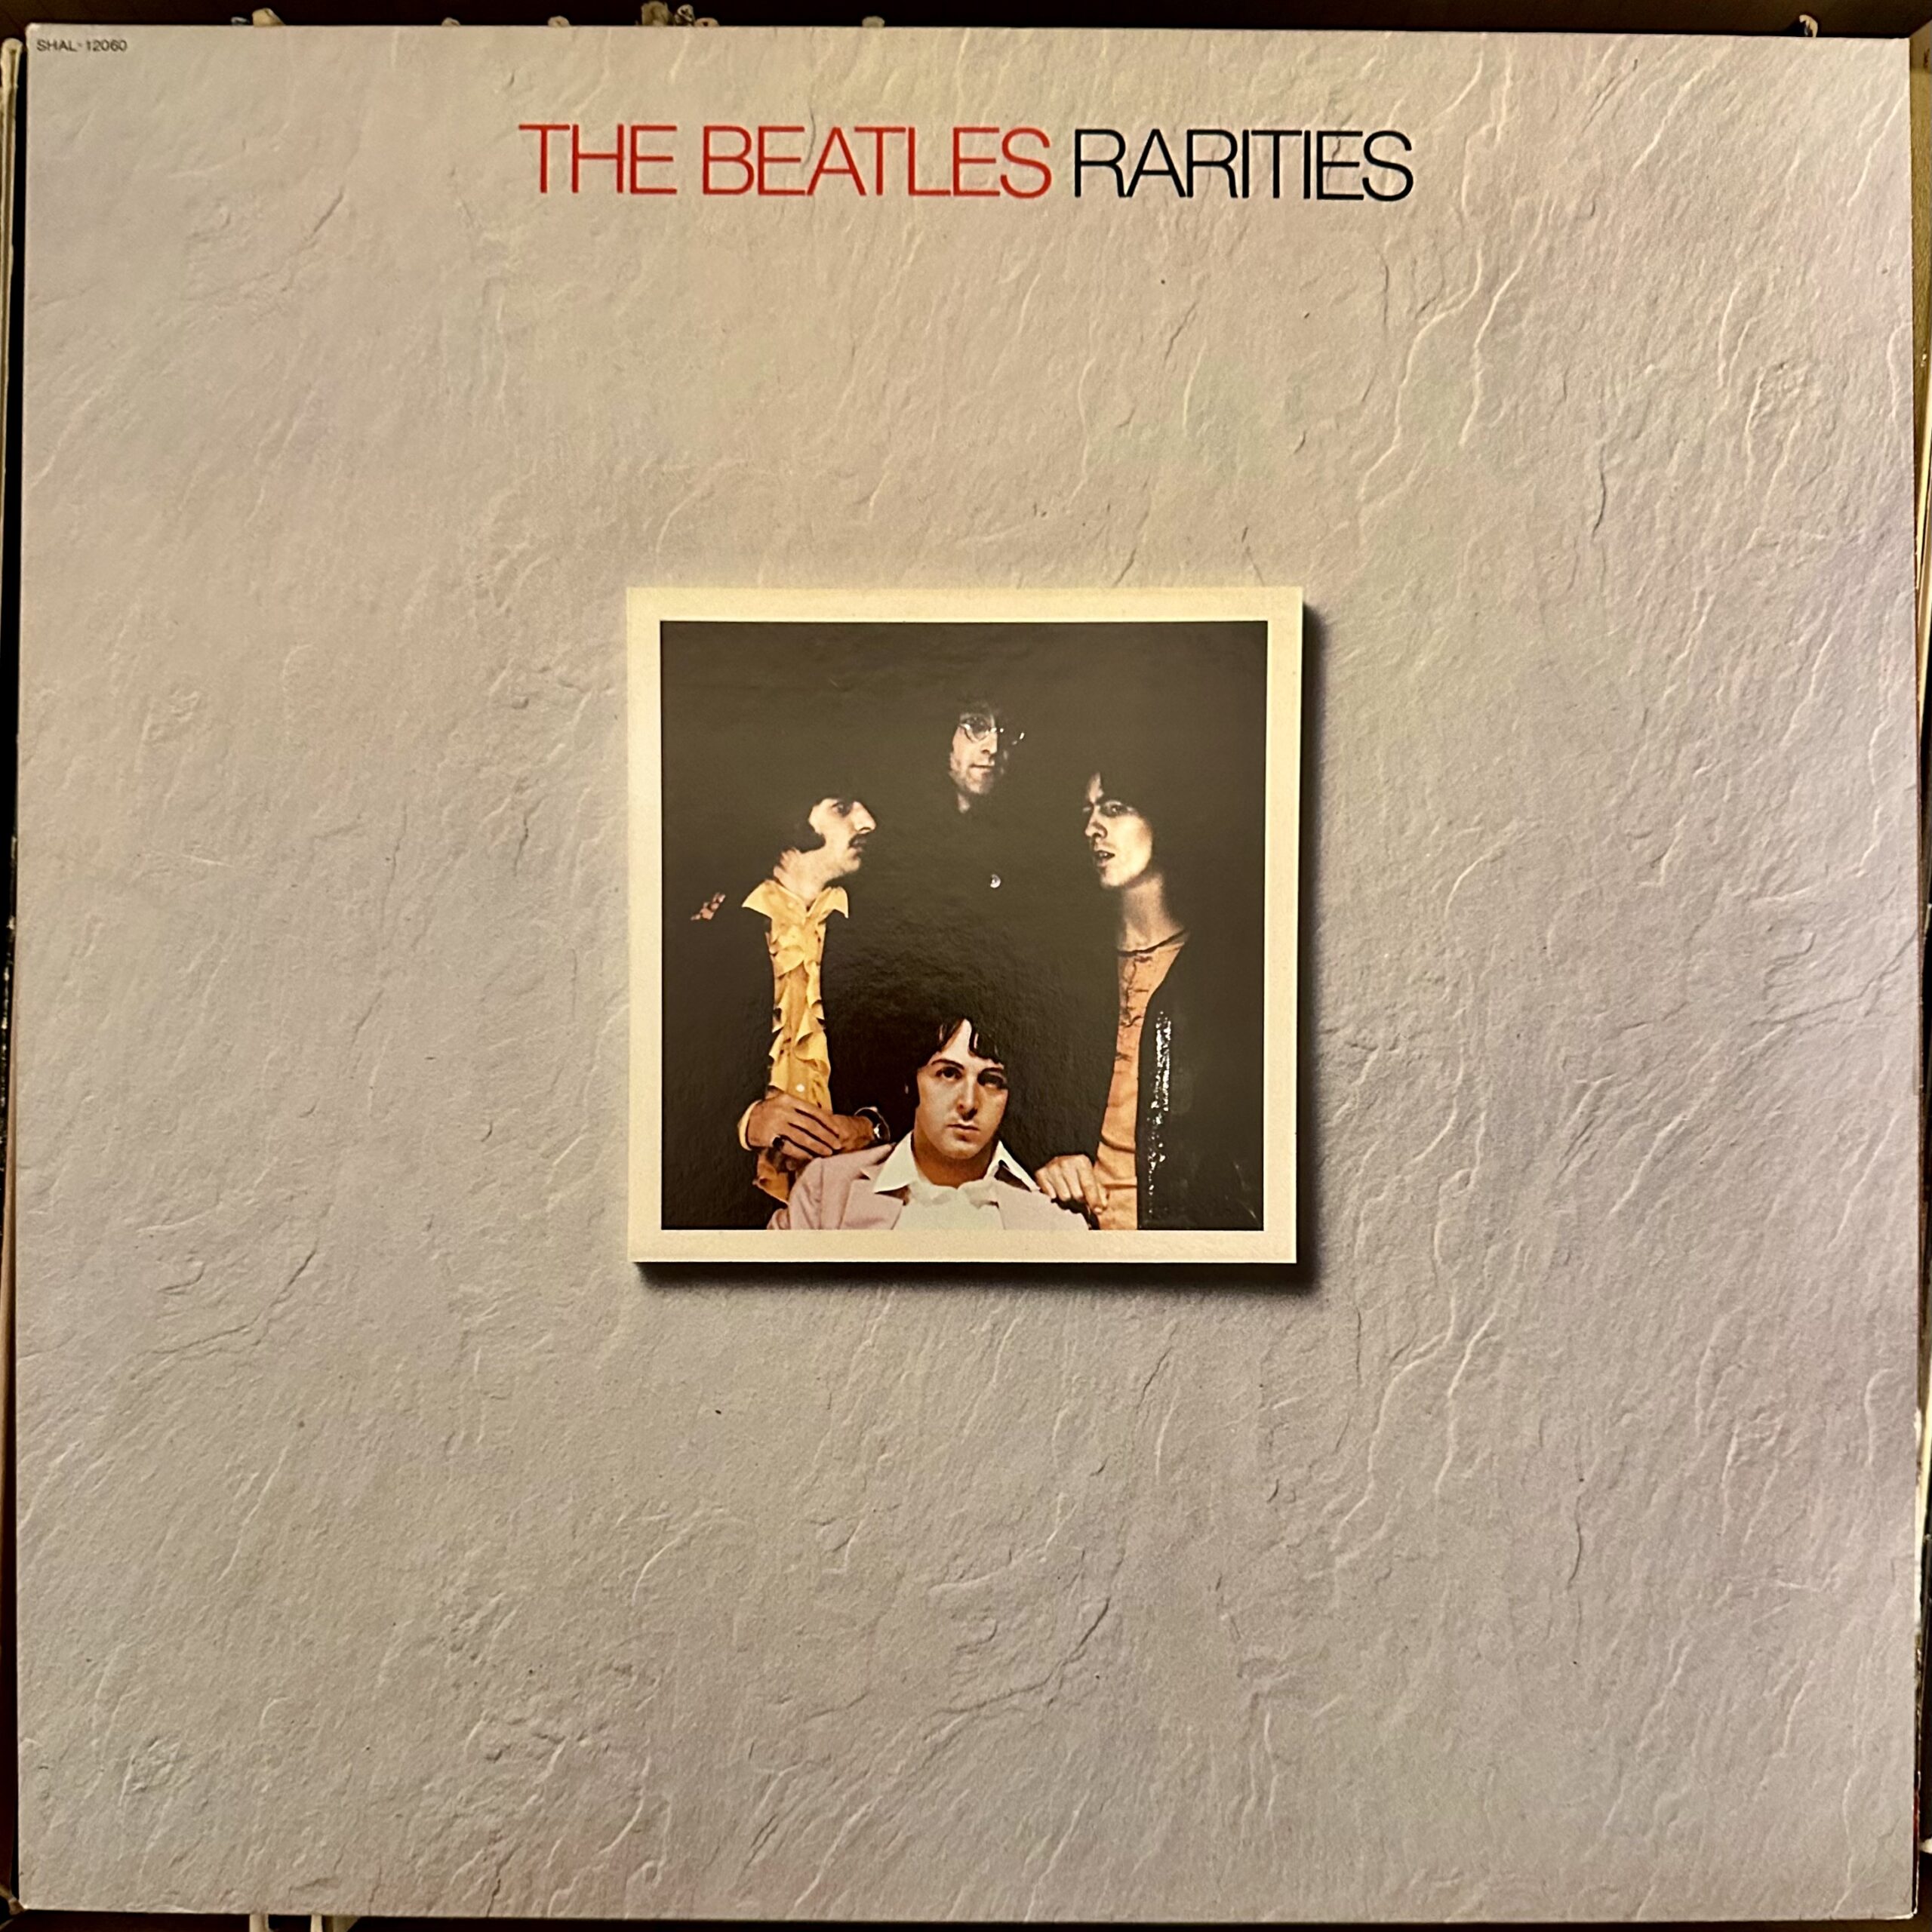 Rarities by the Beatles